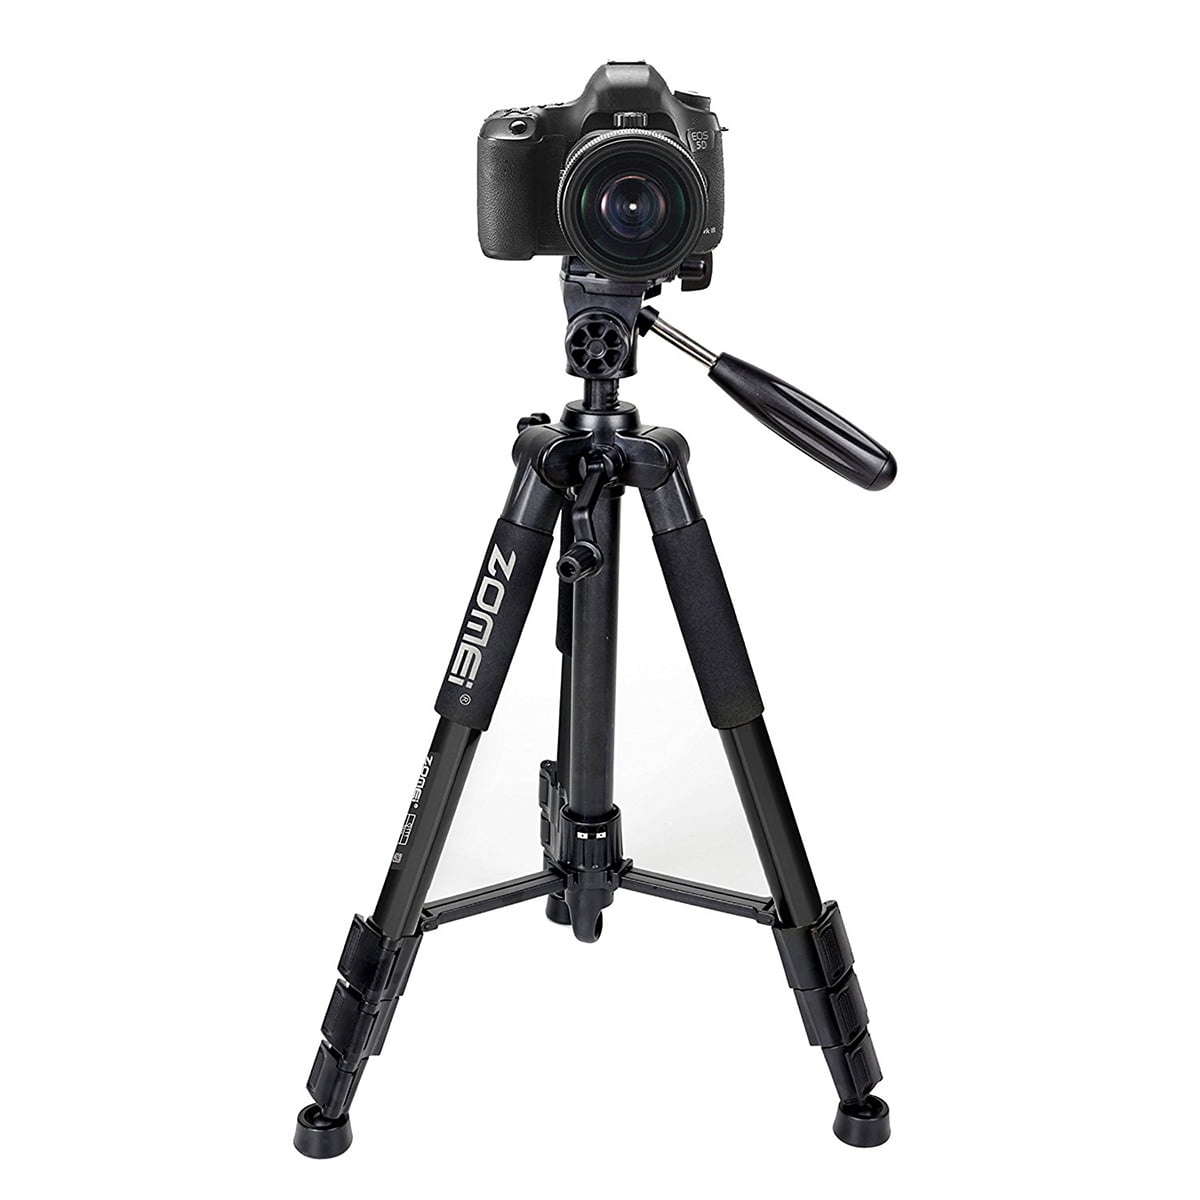 Camera Tripod 168cm/66 inch,Portable Travel Tripod with Monopod 360° Panorama Ball,Compact Lightweight Tripod for Camcorder DSLR Mirrorless Canon Nikon Sony Camera,Standard 1/4 Quick Release Plate